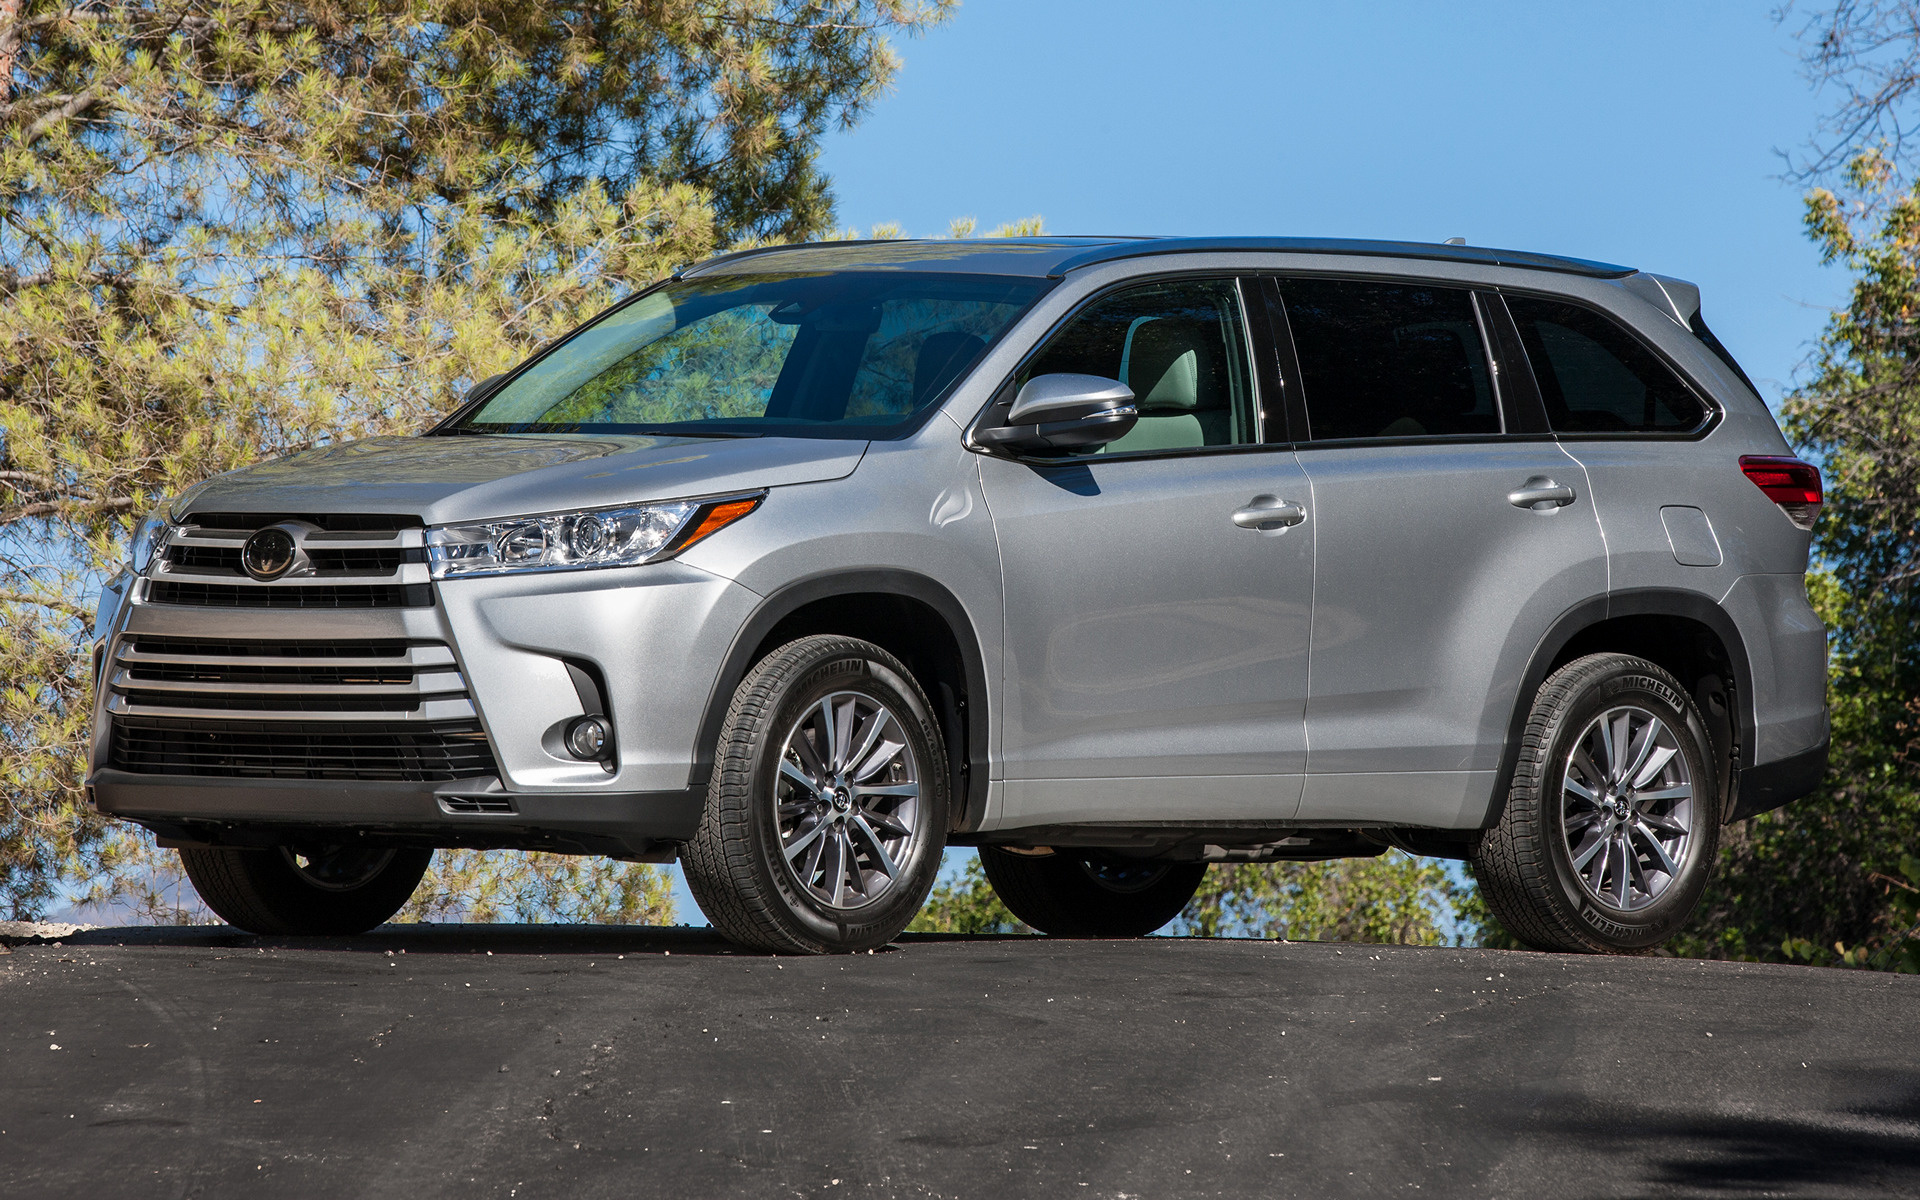 Toyota Highlander XLE and HD Image